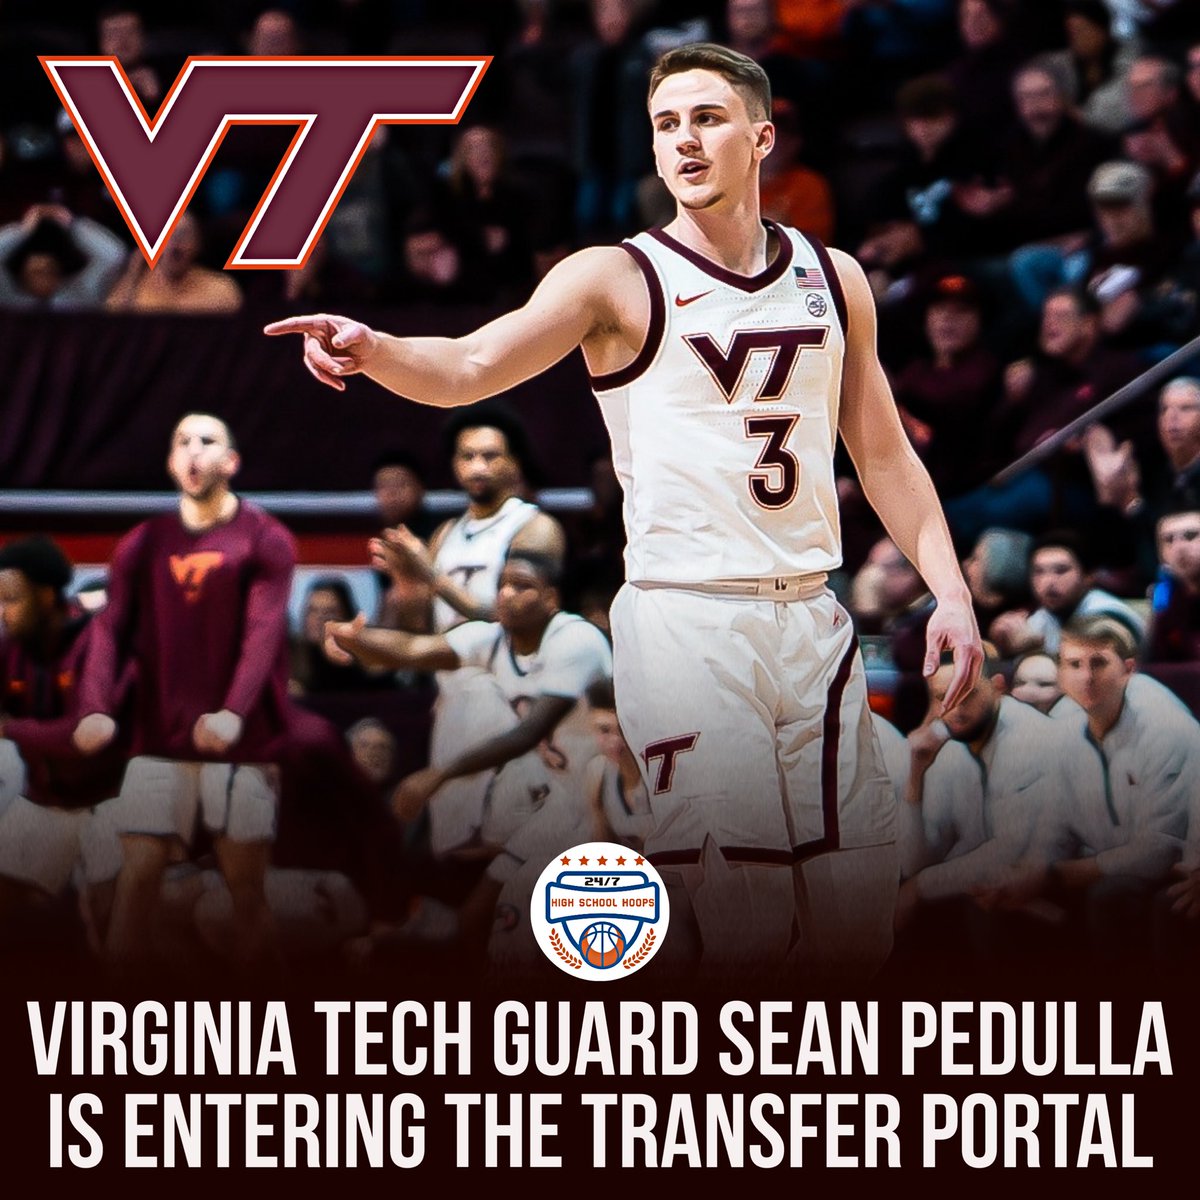 NEWS: Virginia Tech guard Sean Pedulla (@PedullaSean) is entering the transfer portal, a source tells me. Pedulla has spent three seasons in Blacksburg, starting all 64 games he played in the last two seasons. Native of Edmond, Oklahoma. He averaged 16.4PPG, 4.4APG, 4.3RPG and